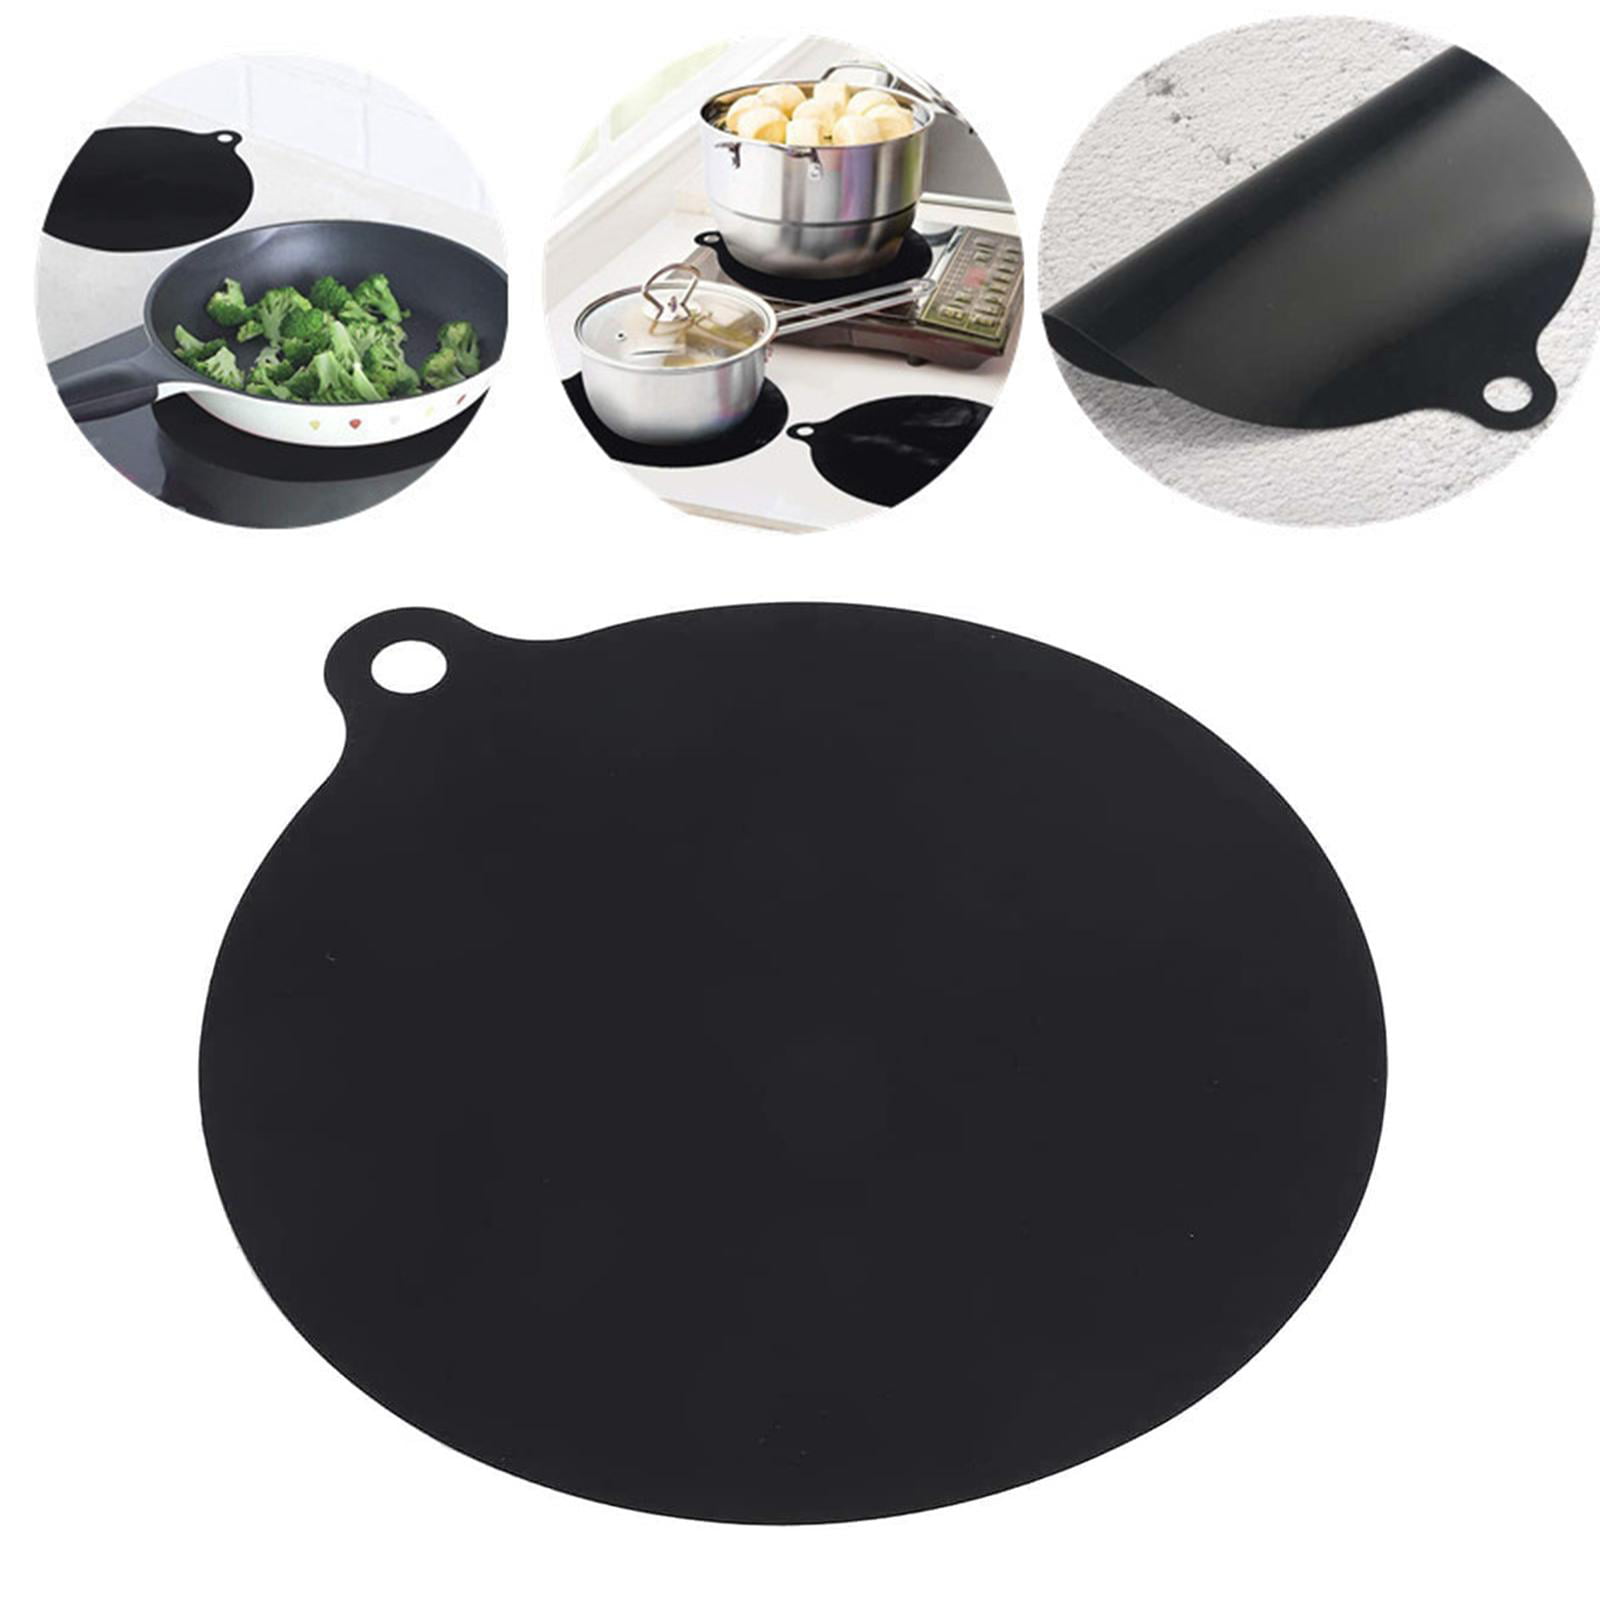  Non-Slip Induction Cooktop Protector Mat 28.5x20.5 Rubber  Bottom Induction Cooker Mat Stove Top Cover for Kitchen Counter Christmas  Blue Scarf Snowman Snowflakes Black Trivet Mats Heat Insulated Mat: Home &  Kitchen